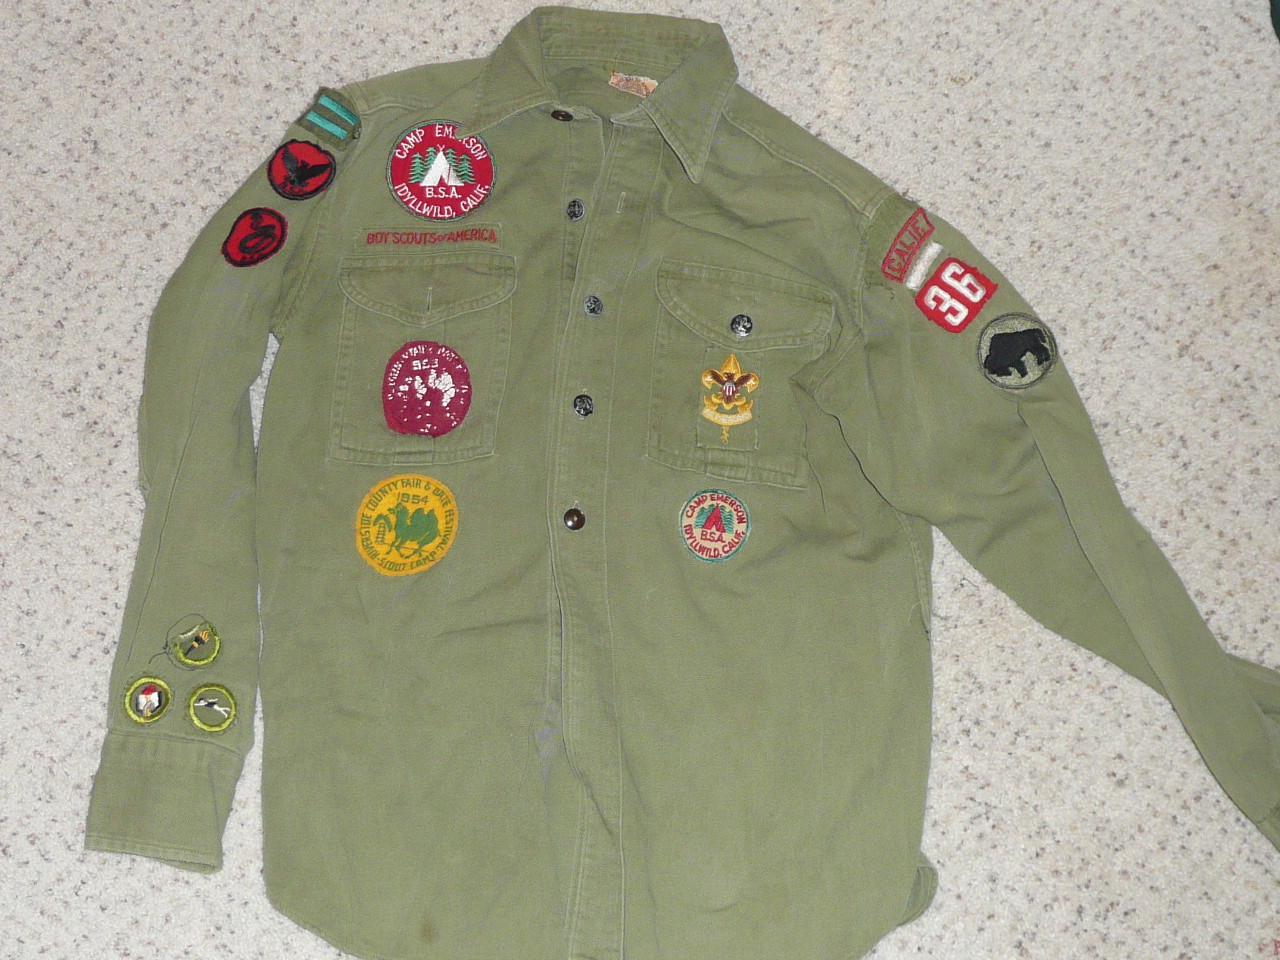 English boy scouts uniforms: The 1950s activities